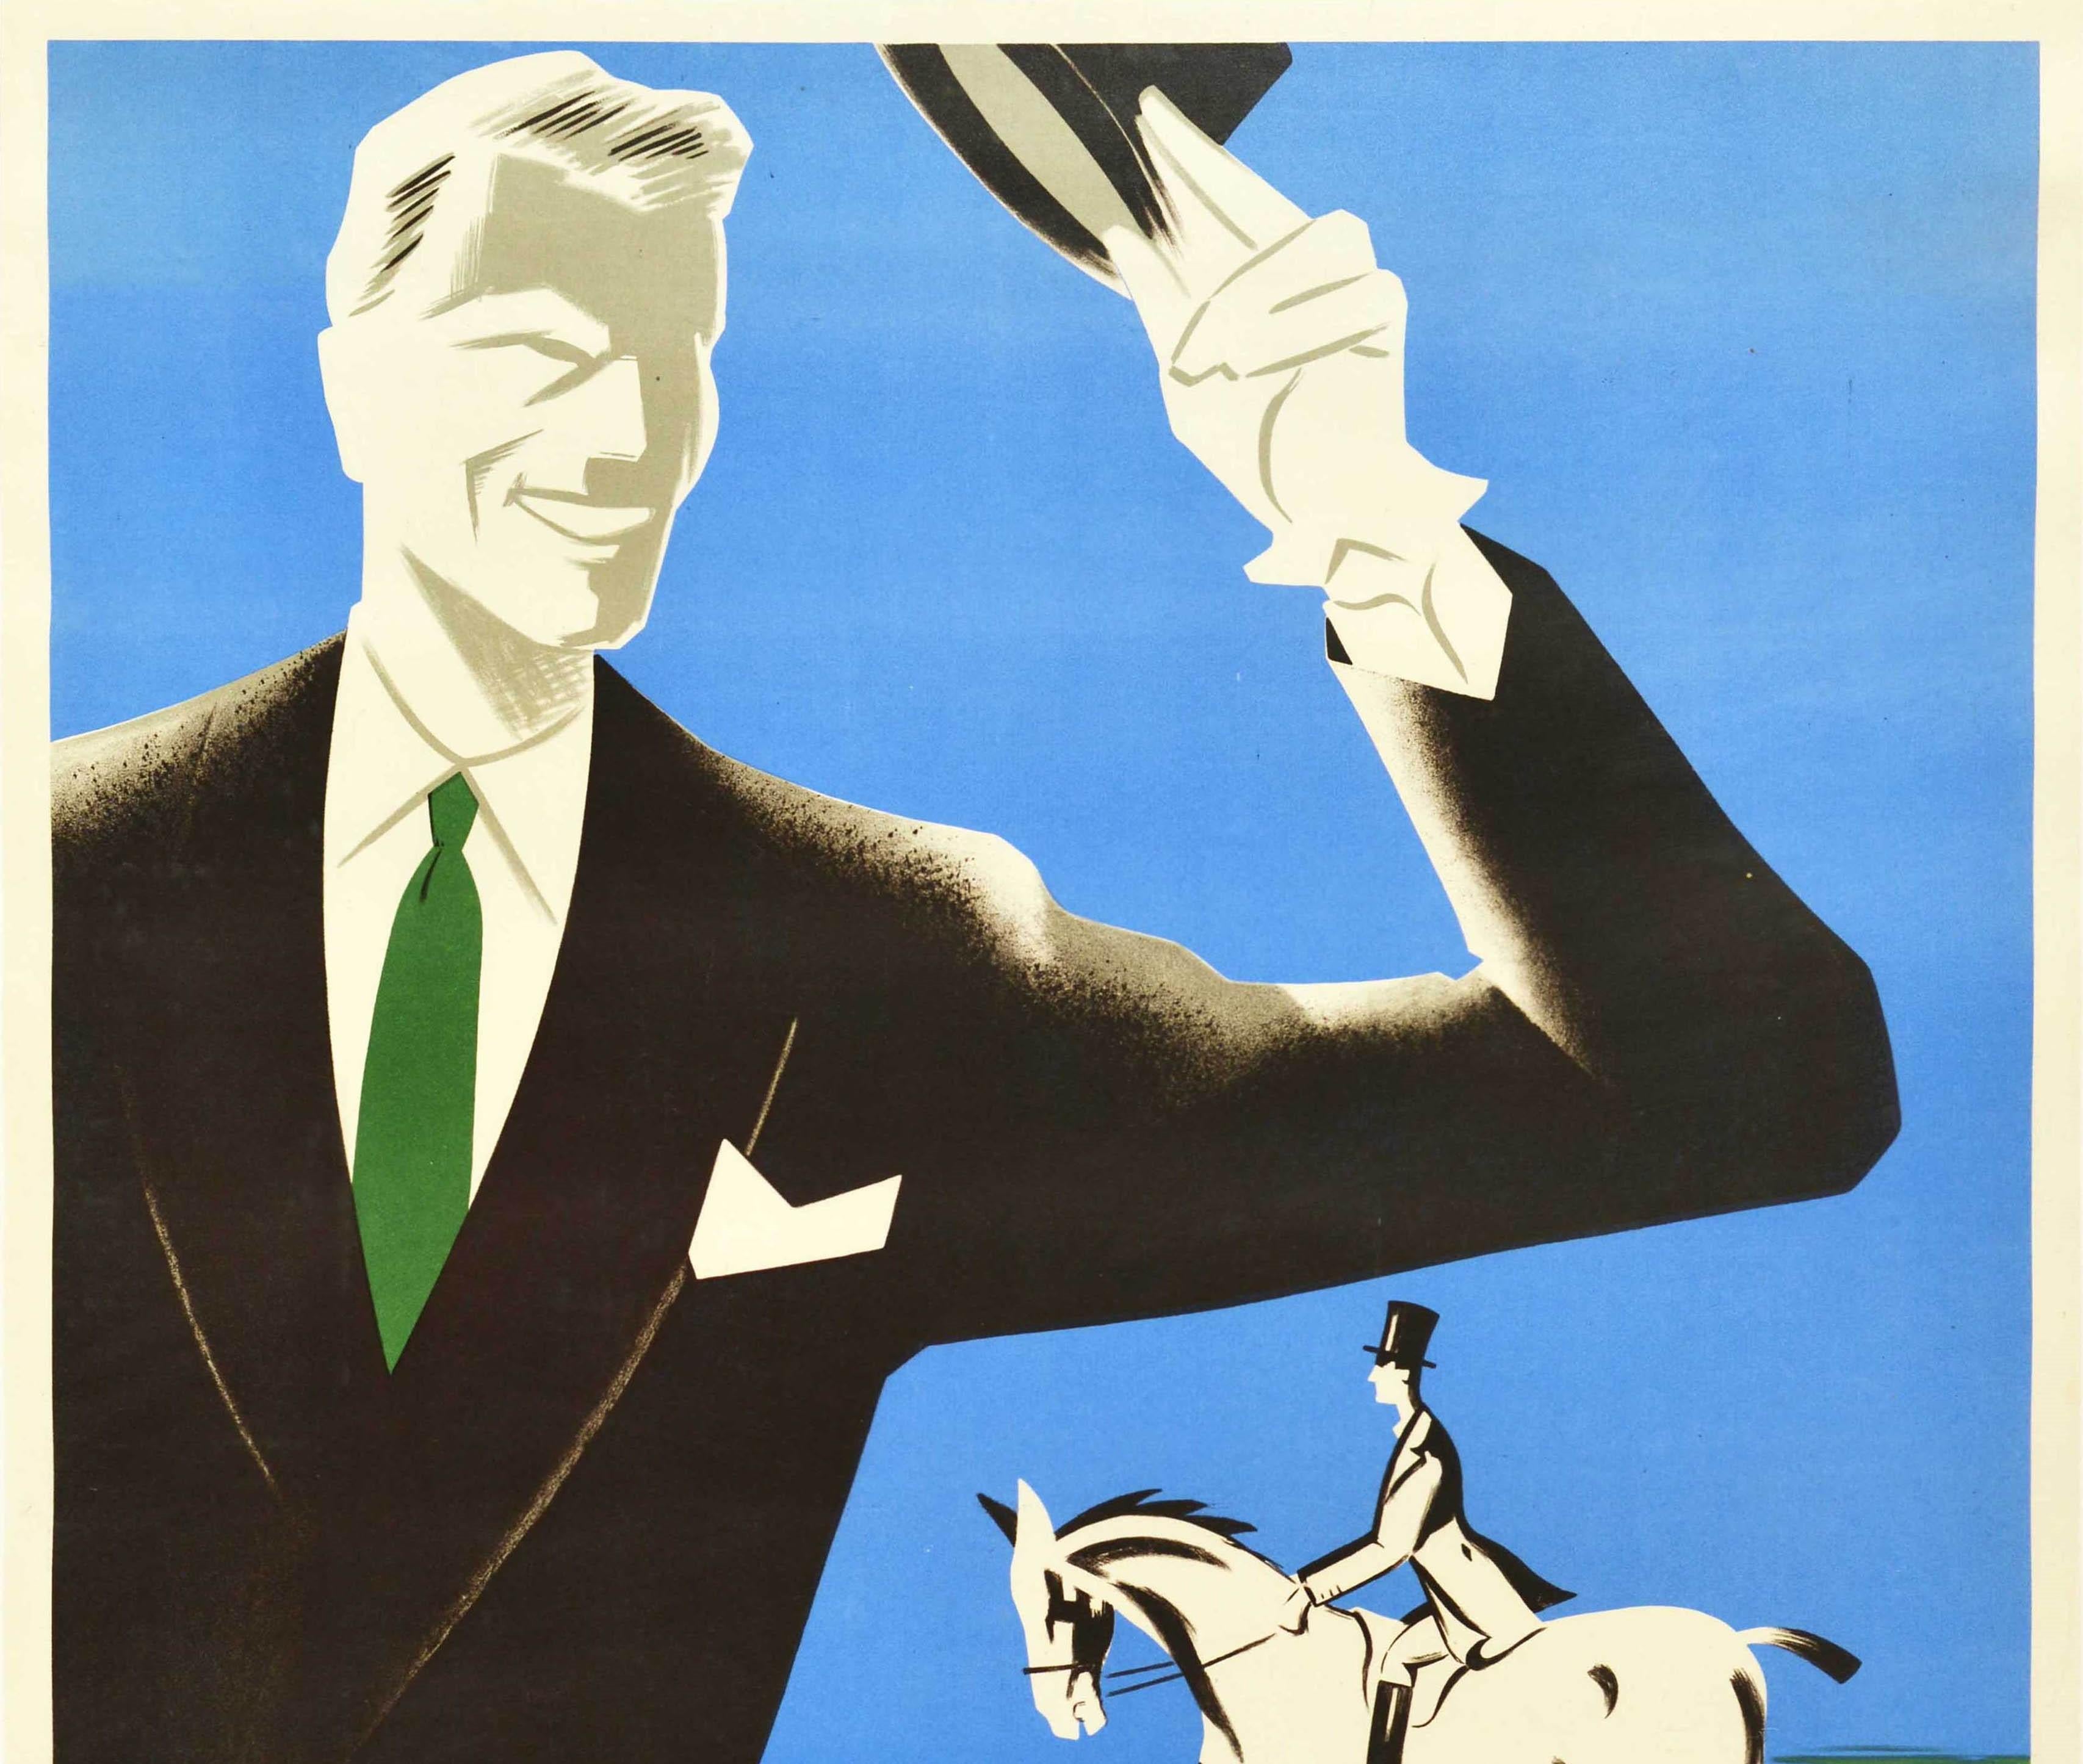 Original vintage men's fashion advertising poster - The clothing that classifies an Epsom man / Le vetement qui classe un homme Epsom - featuring a great Art Deco design depicting a smiling gentleman in a smart suit and green tie, holding up his hat